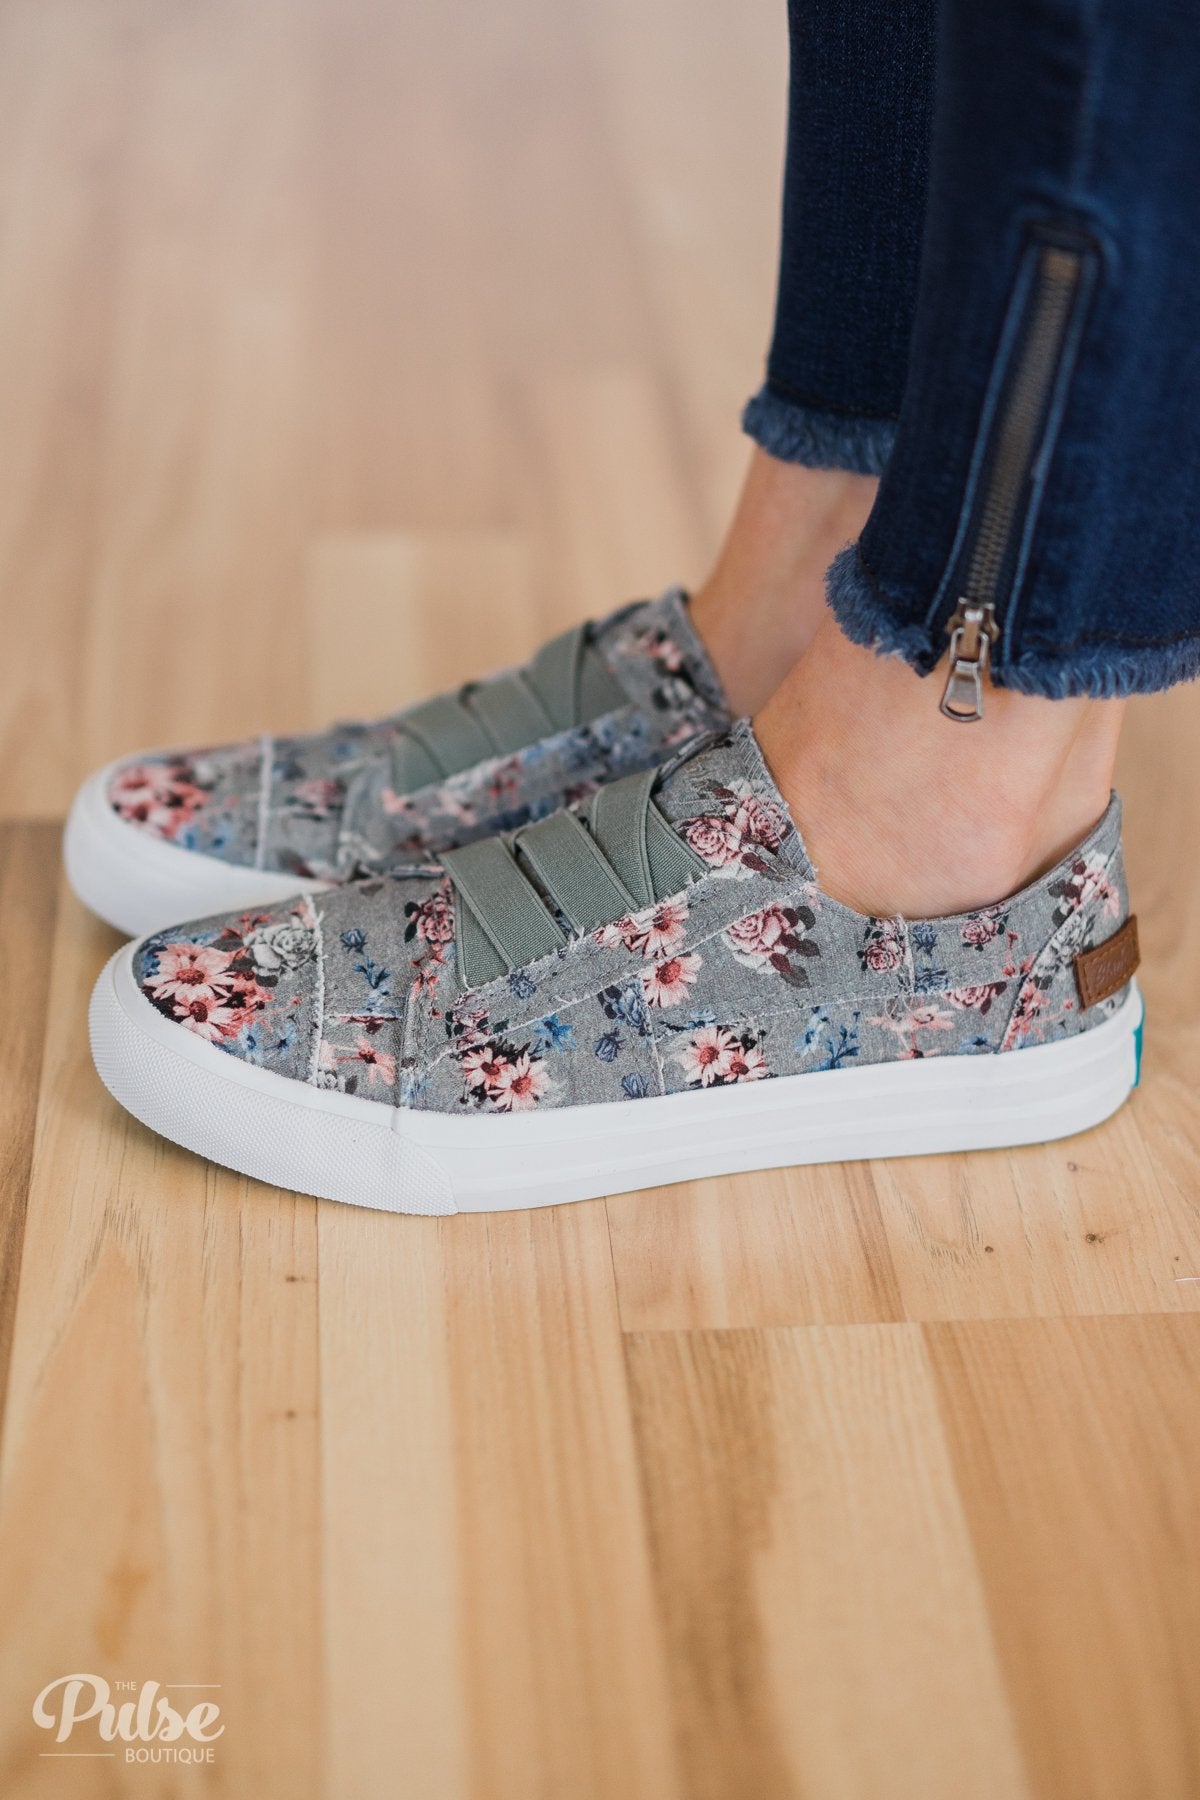 Blowfish Marley Floral Sneakers- Drizzle Gray